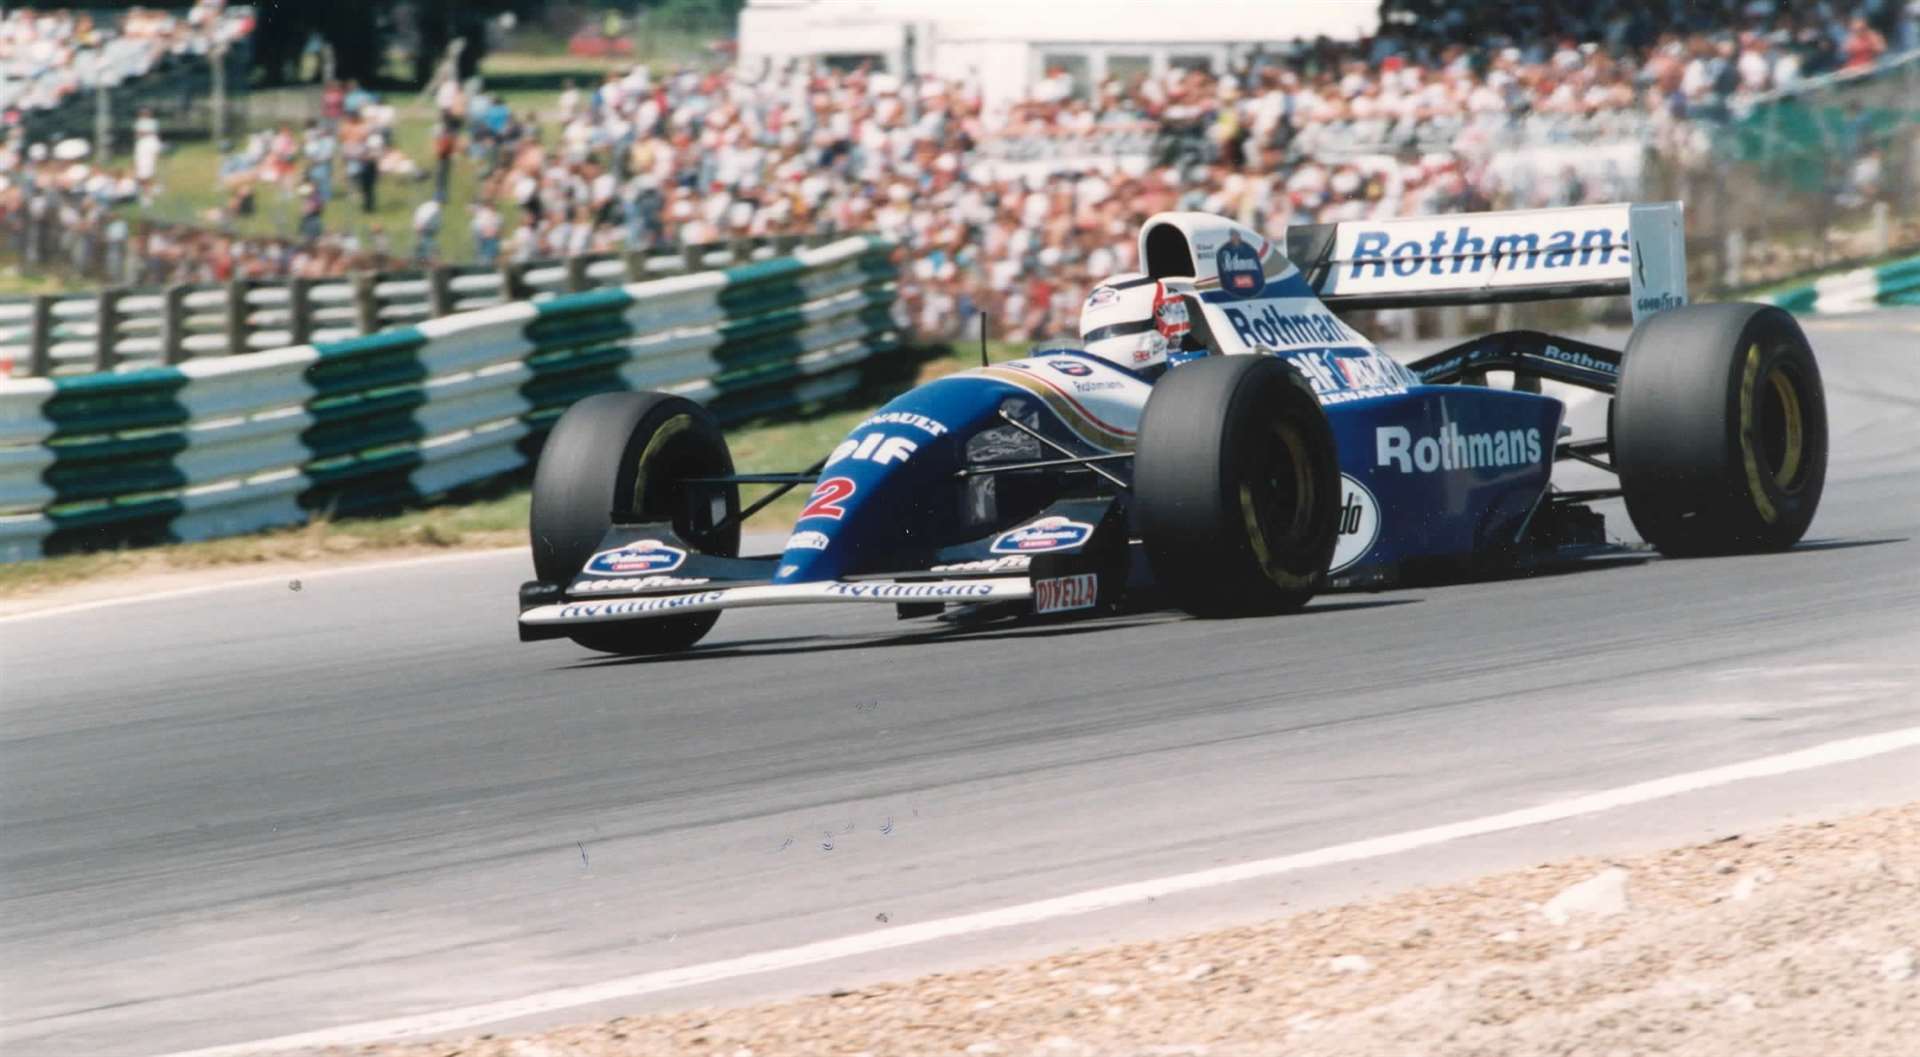 Nigel Mansell could really draw a crowd - here the 1992 world champion is testing at Brands Hatch in June 1994 as he prepares for his F1 comeback